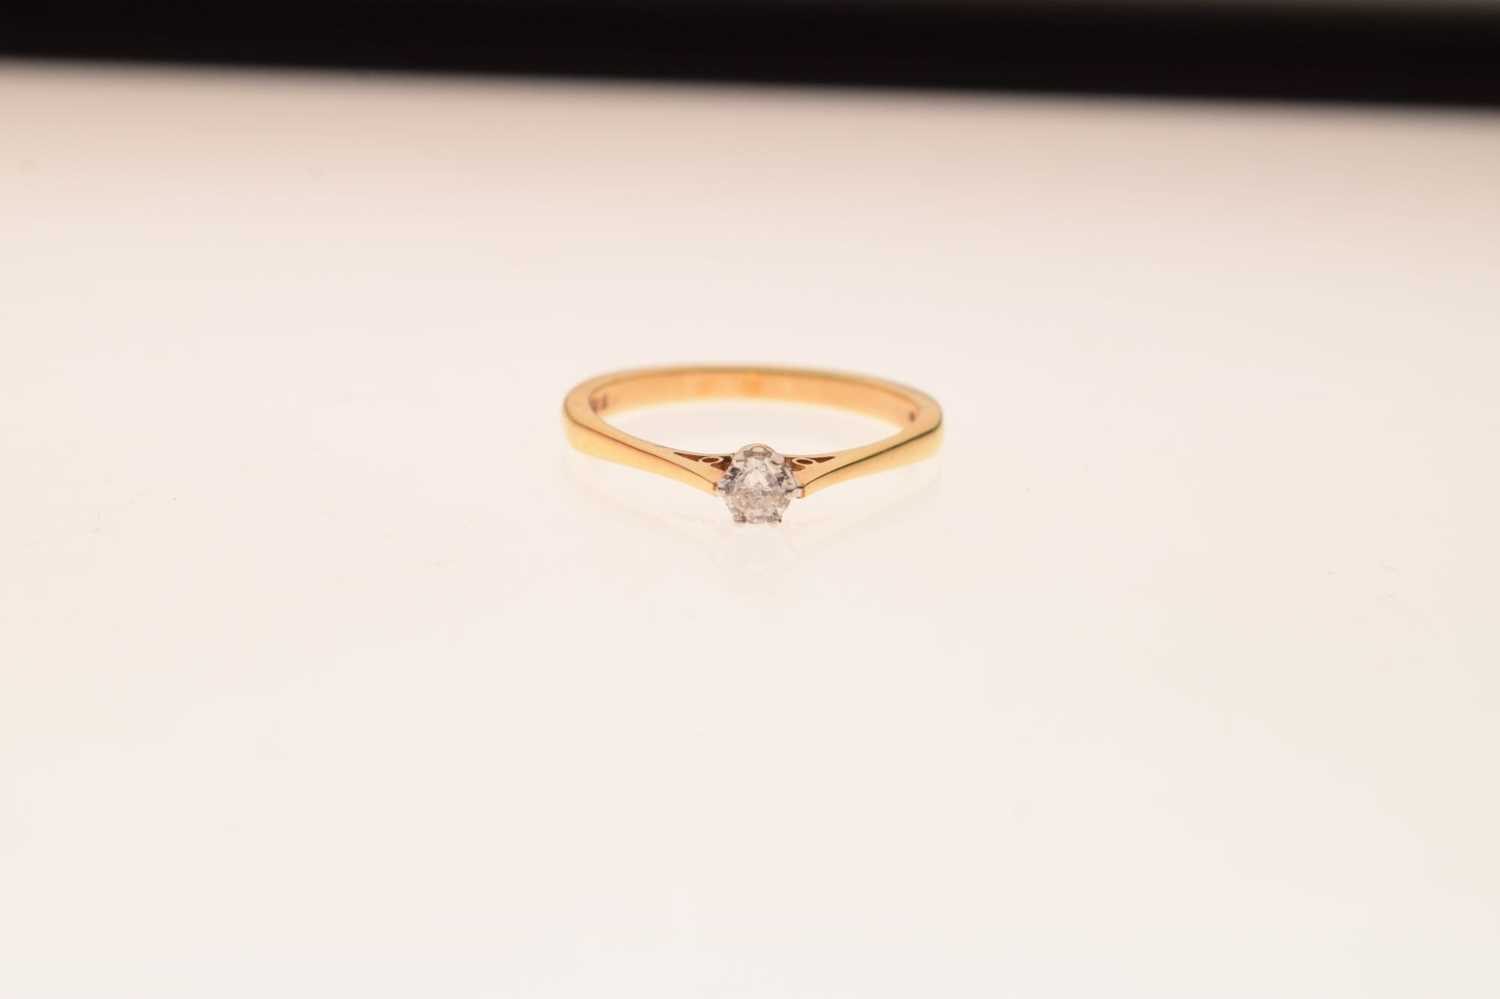 18ct gold solitaire diamond ring - Image 6 of 6